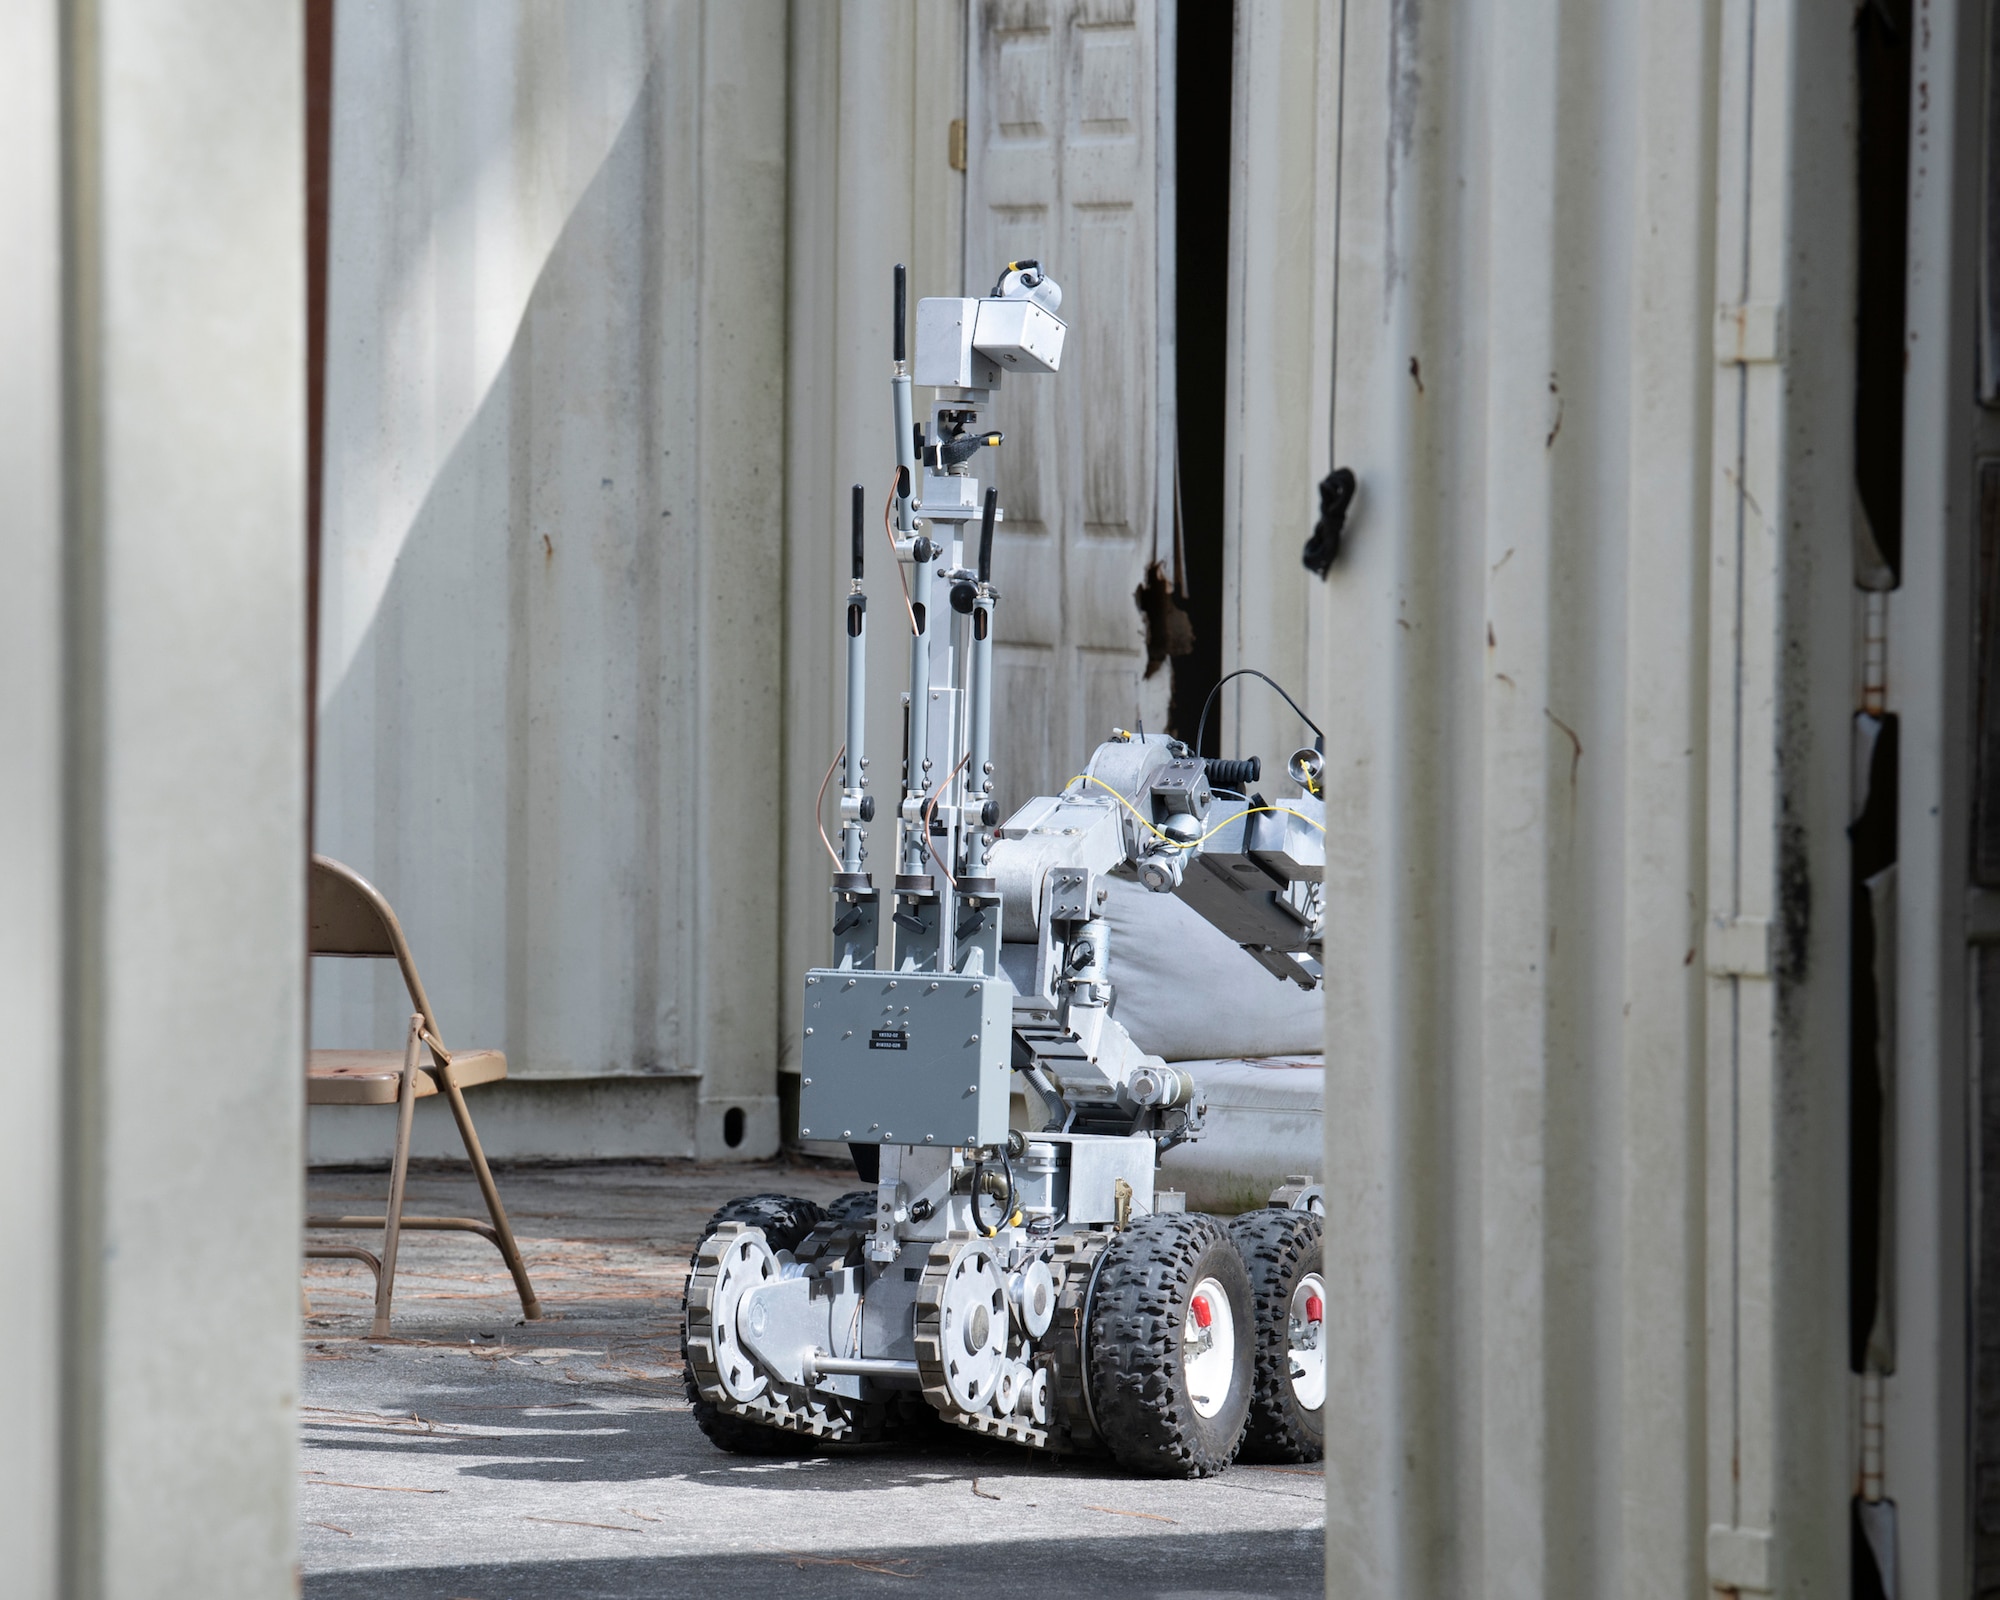 A Romotec ANDROS F6A robot enters a room during an IED training scenario.